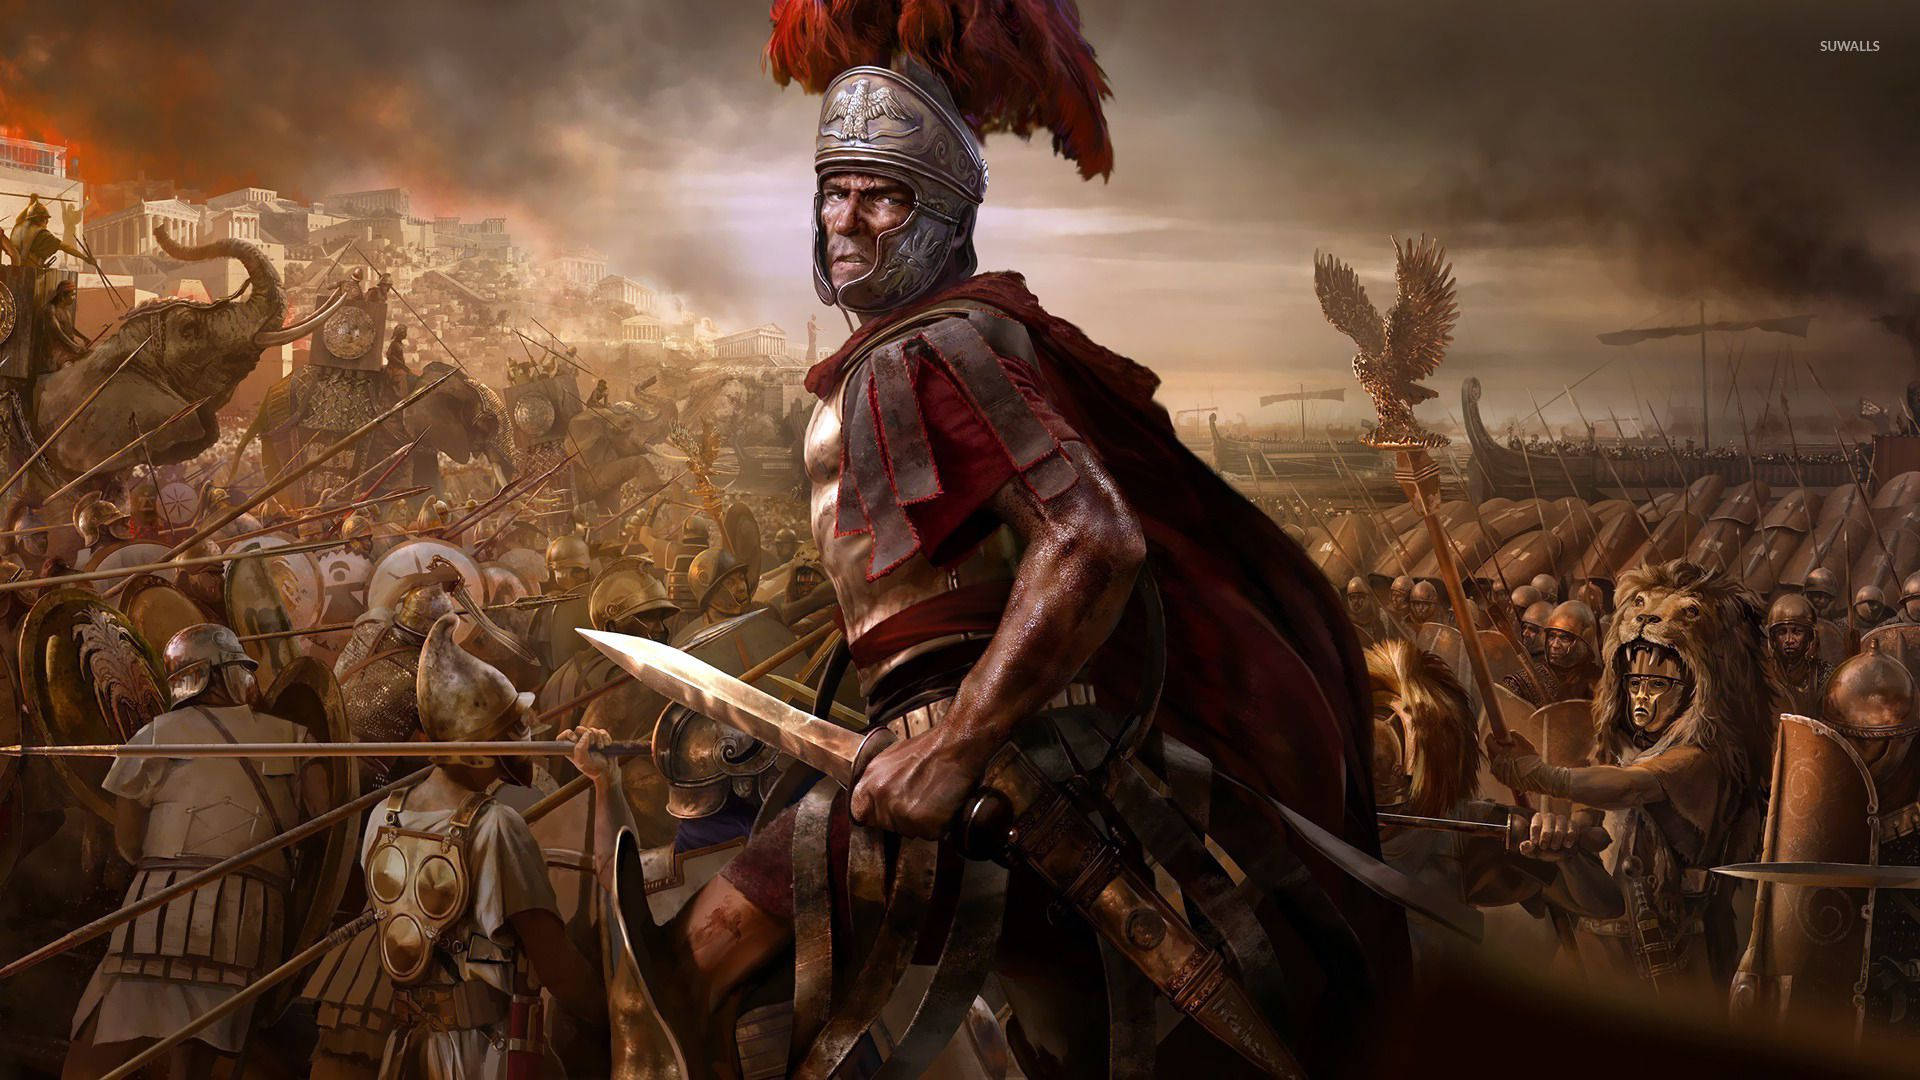 A Man In A Roman Costume Is Standing In Front Of A Crowd Wallpaper